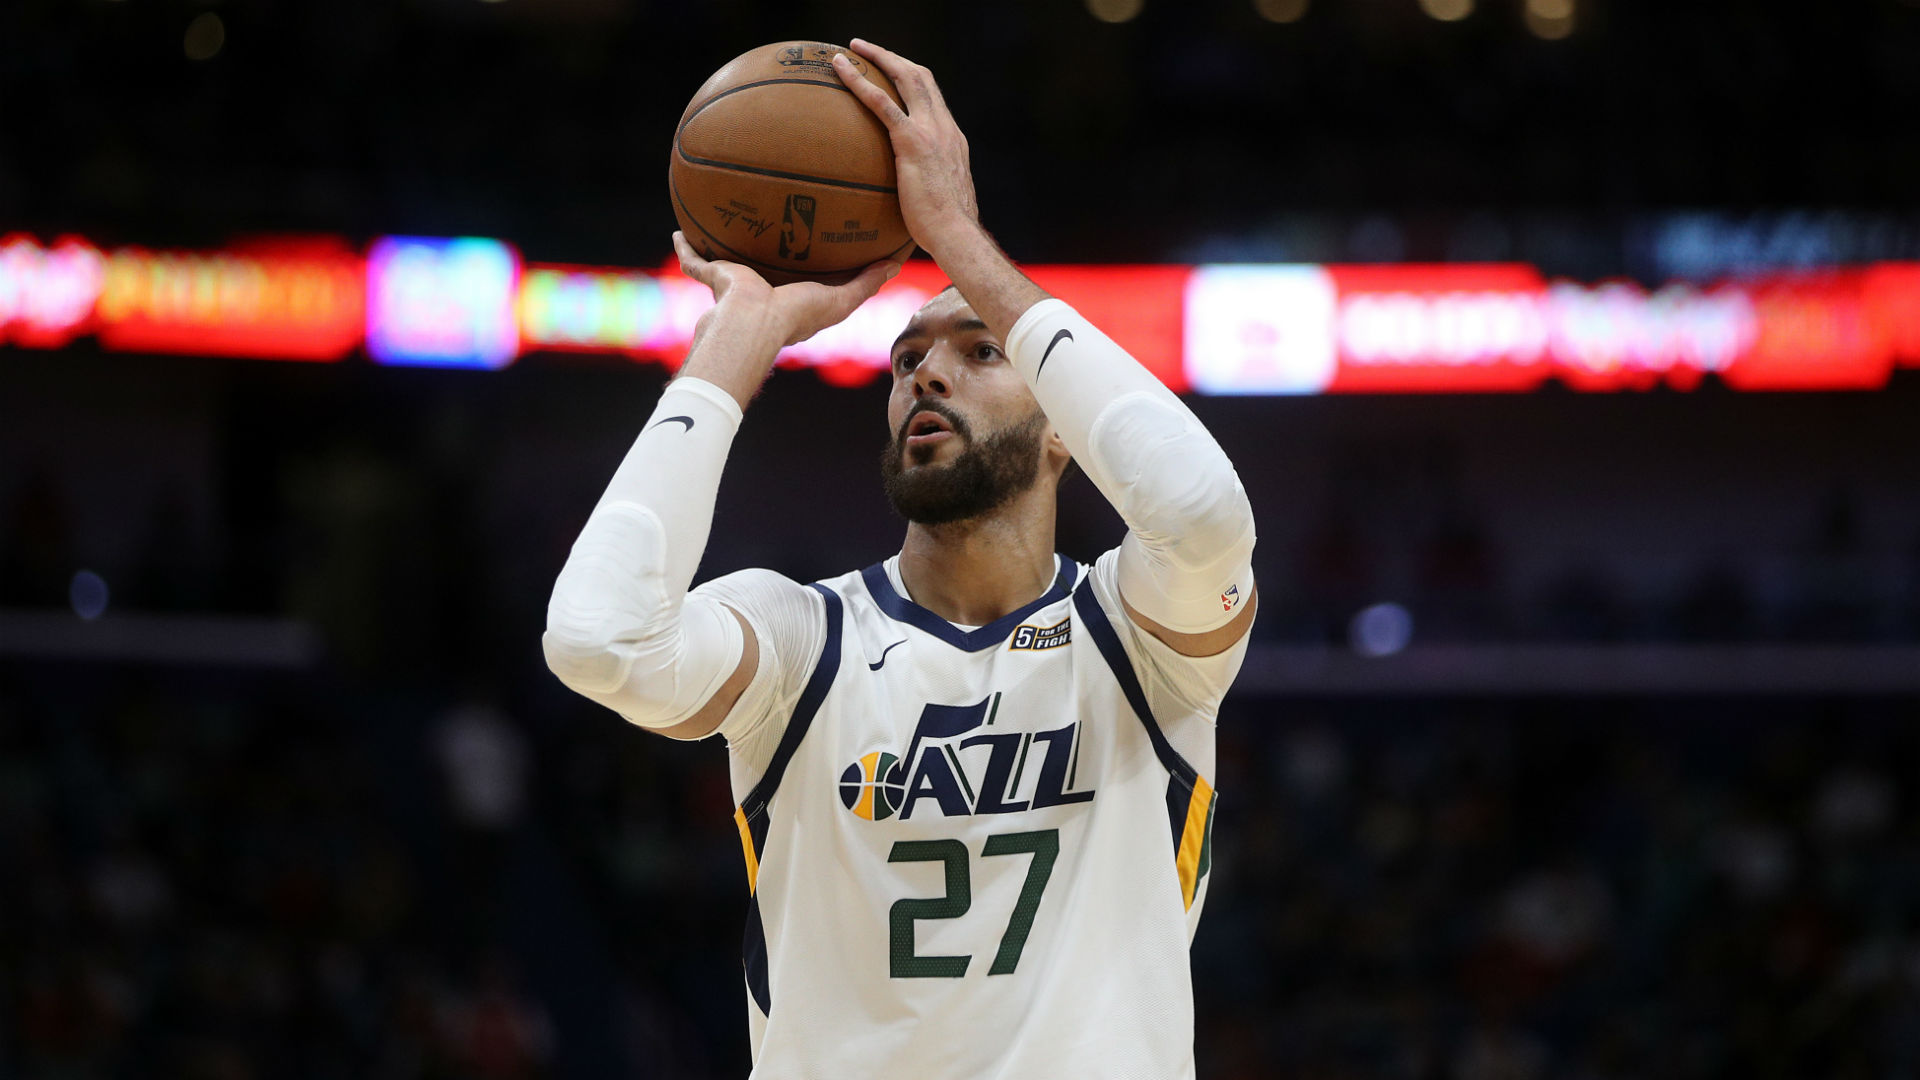 Coronavirus and the NBA: Why league suspended season & what may come next after Rudy Gobert's positive test